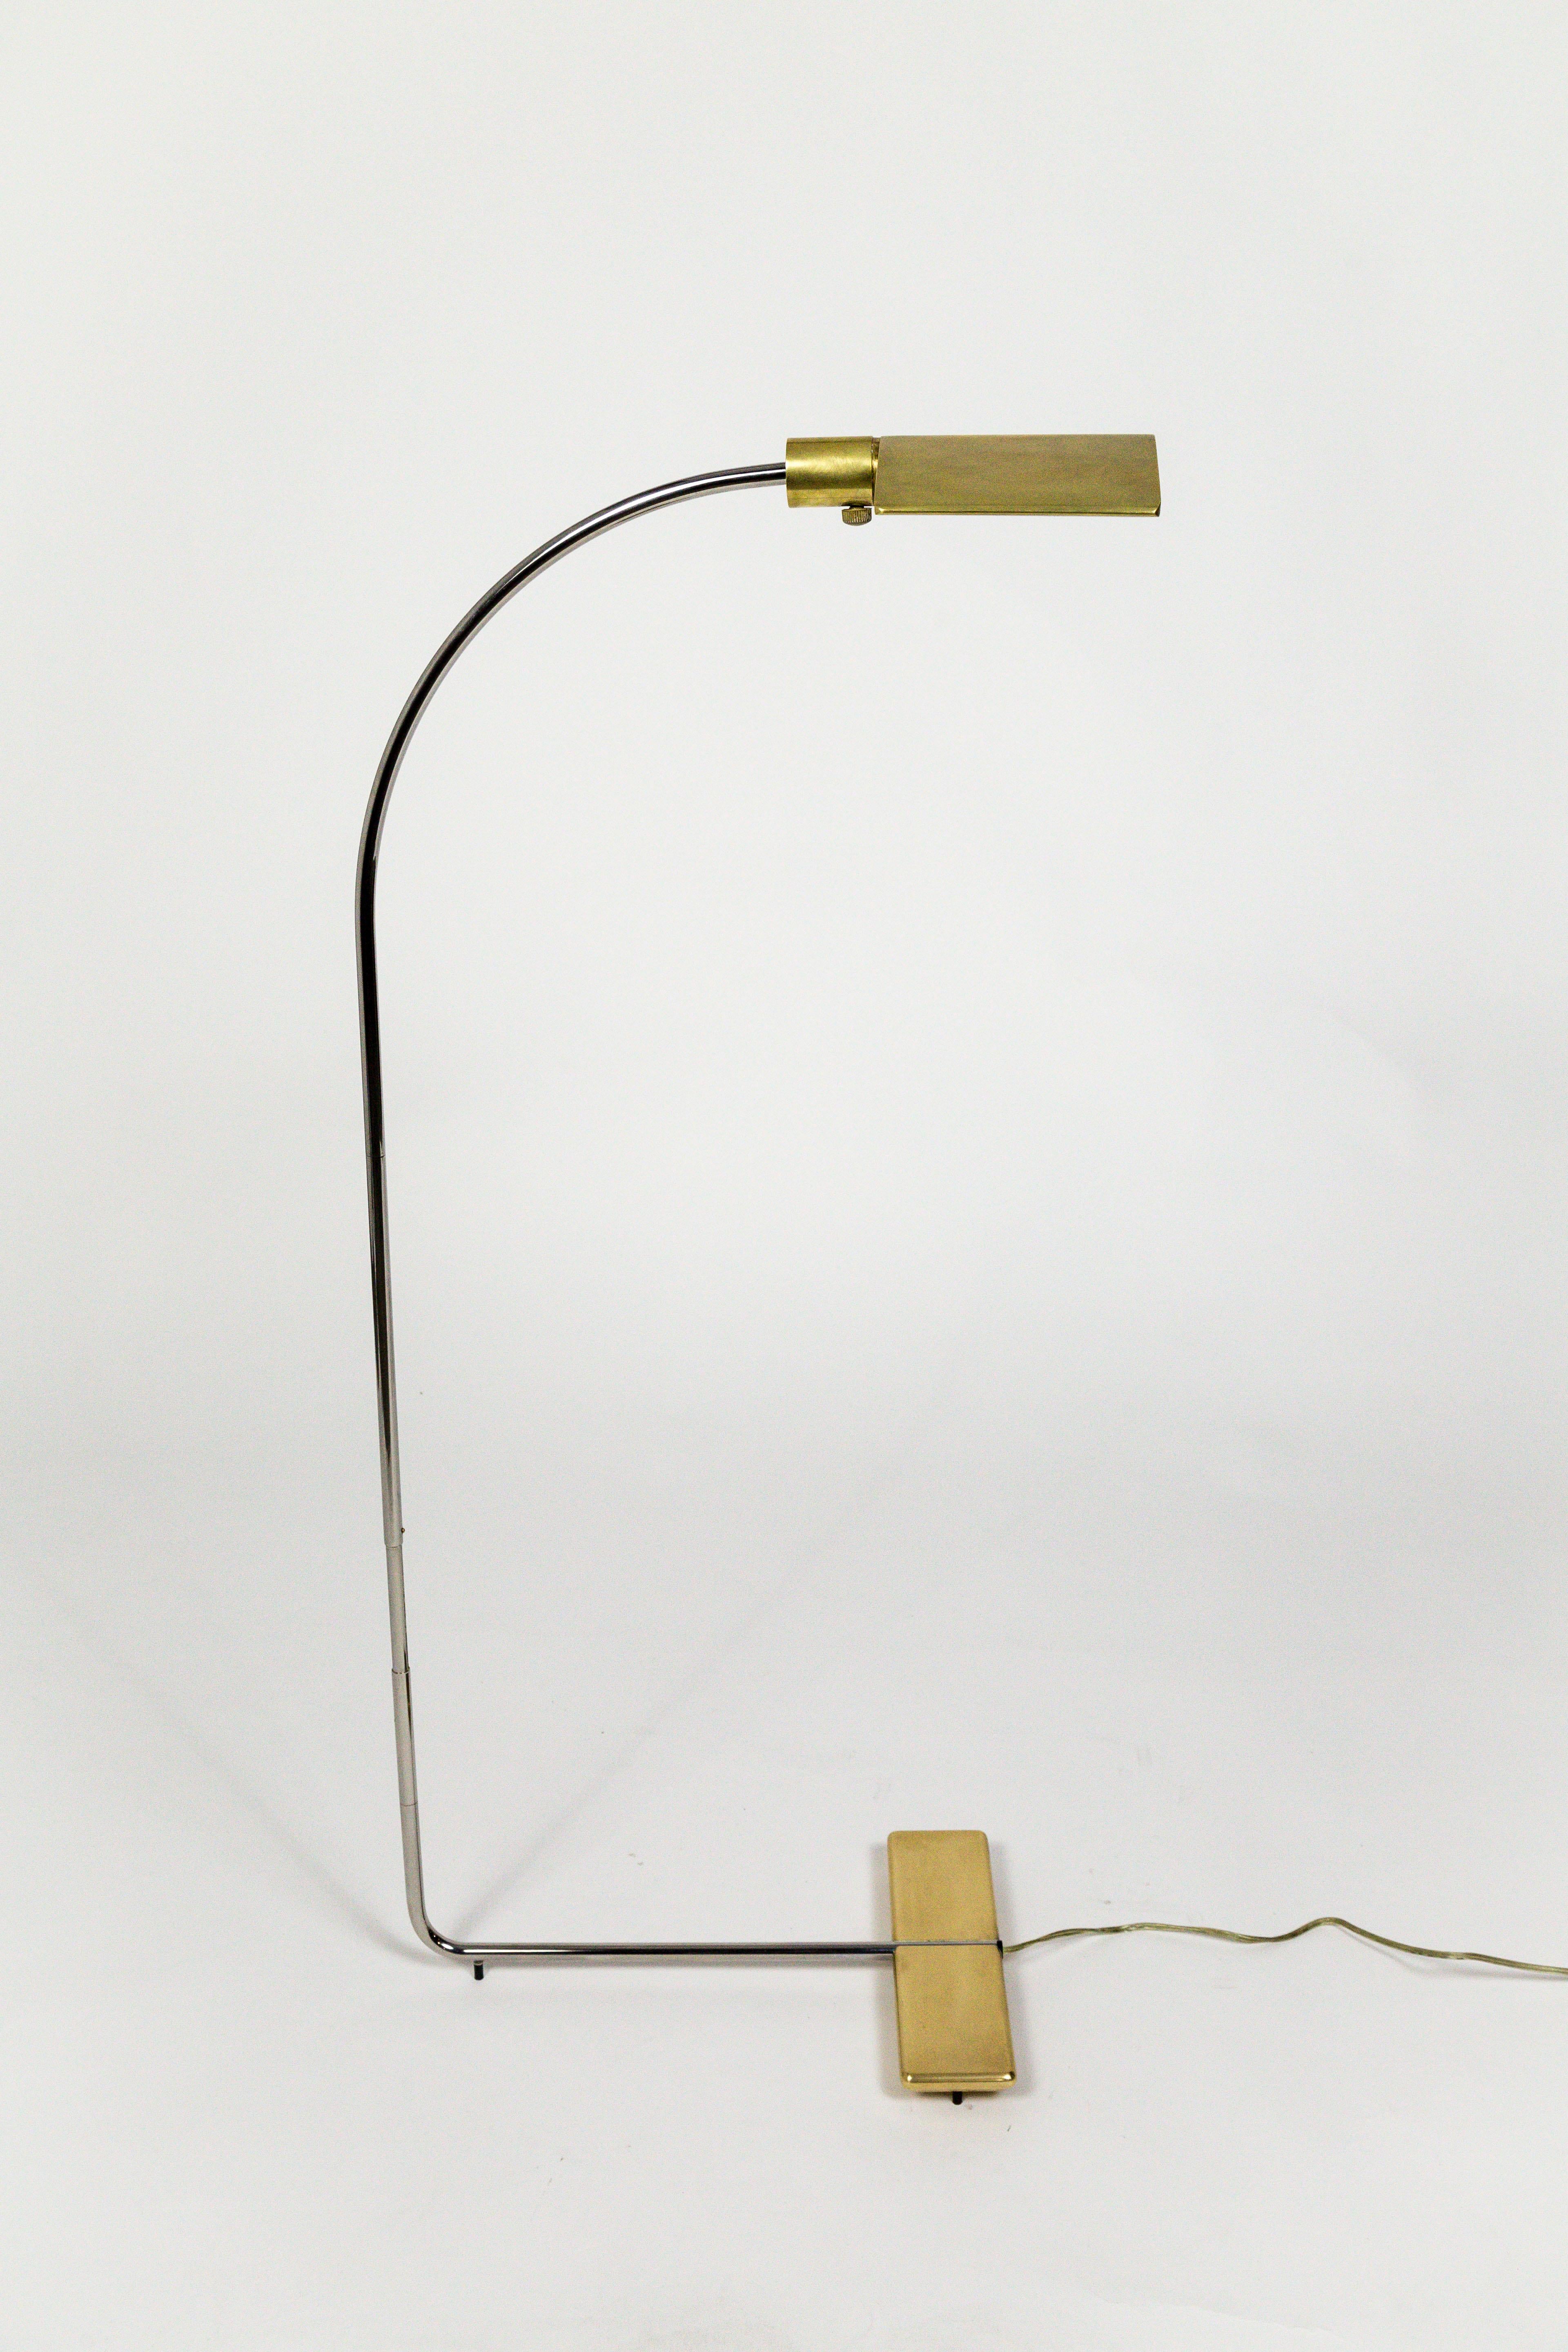 This Cedric Hartman chrome and brass floor lamp is an early version of a lamp which later became known as the 91CO lamp. This is a one of a kind, custom version where Cedric Hartman increased the length of the base as well as the arch, to